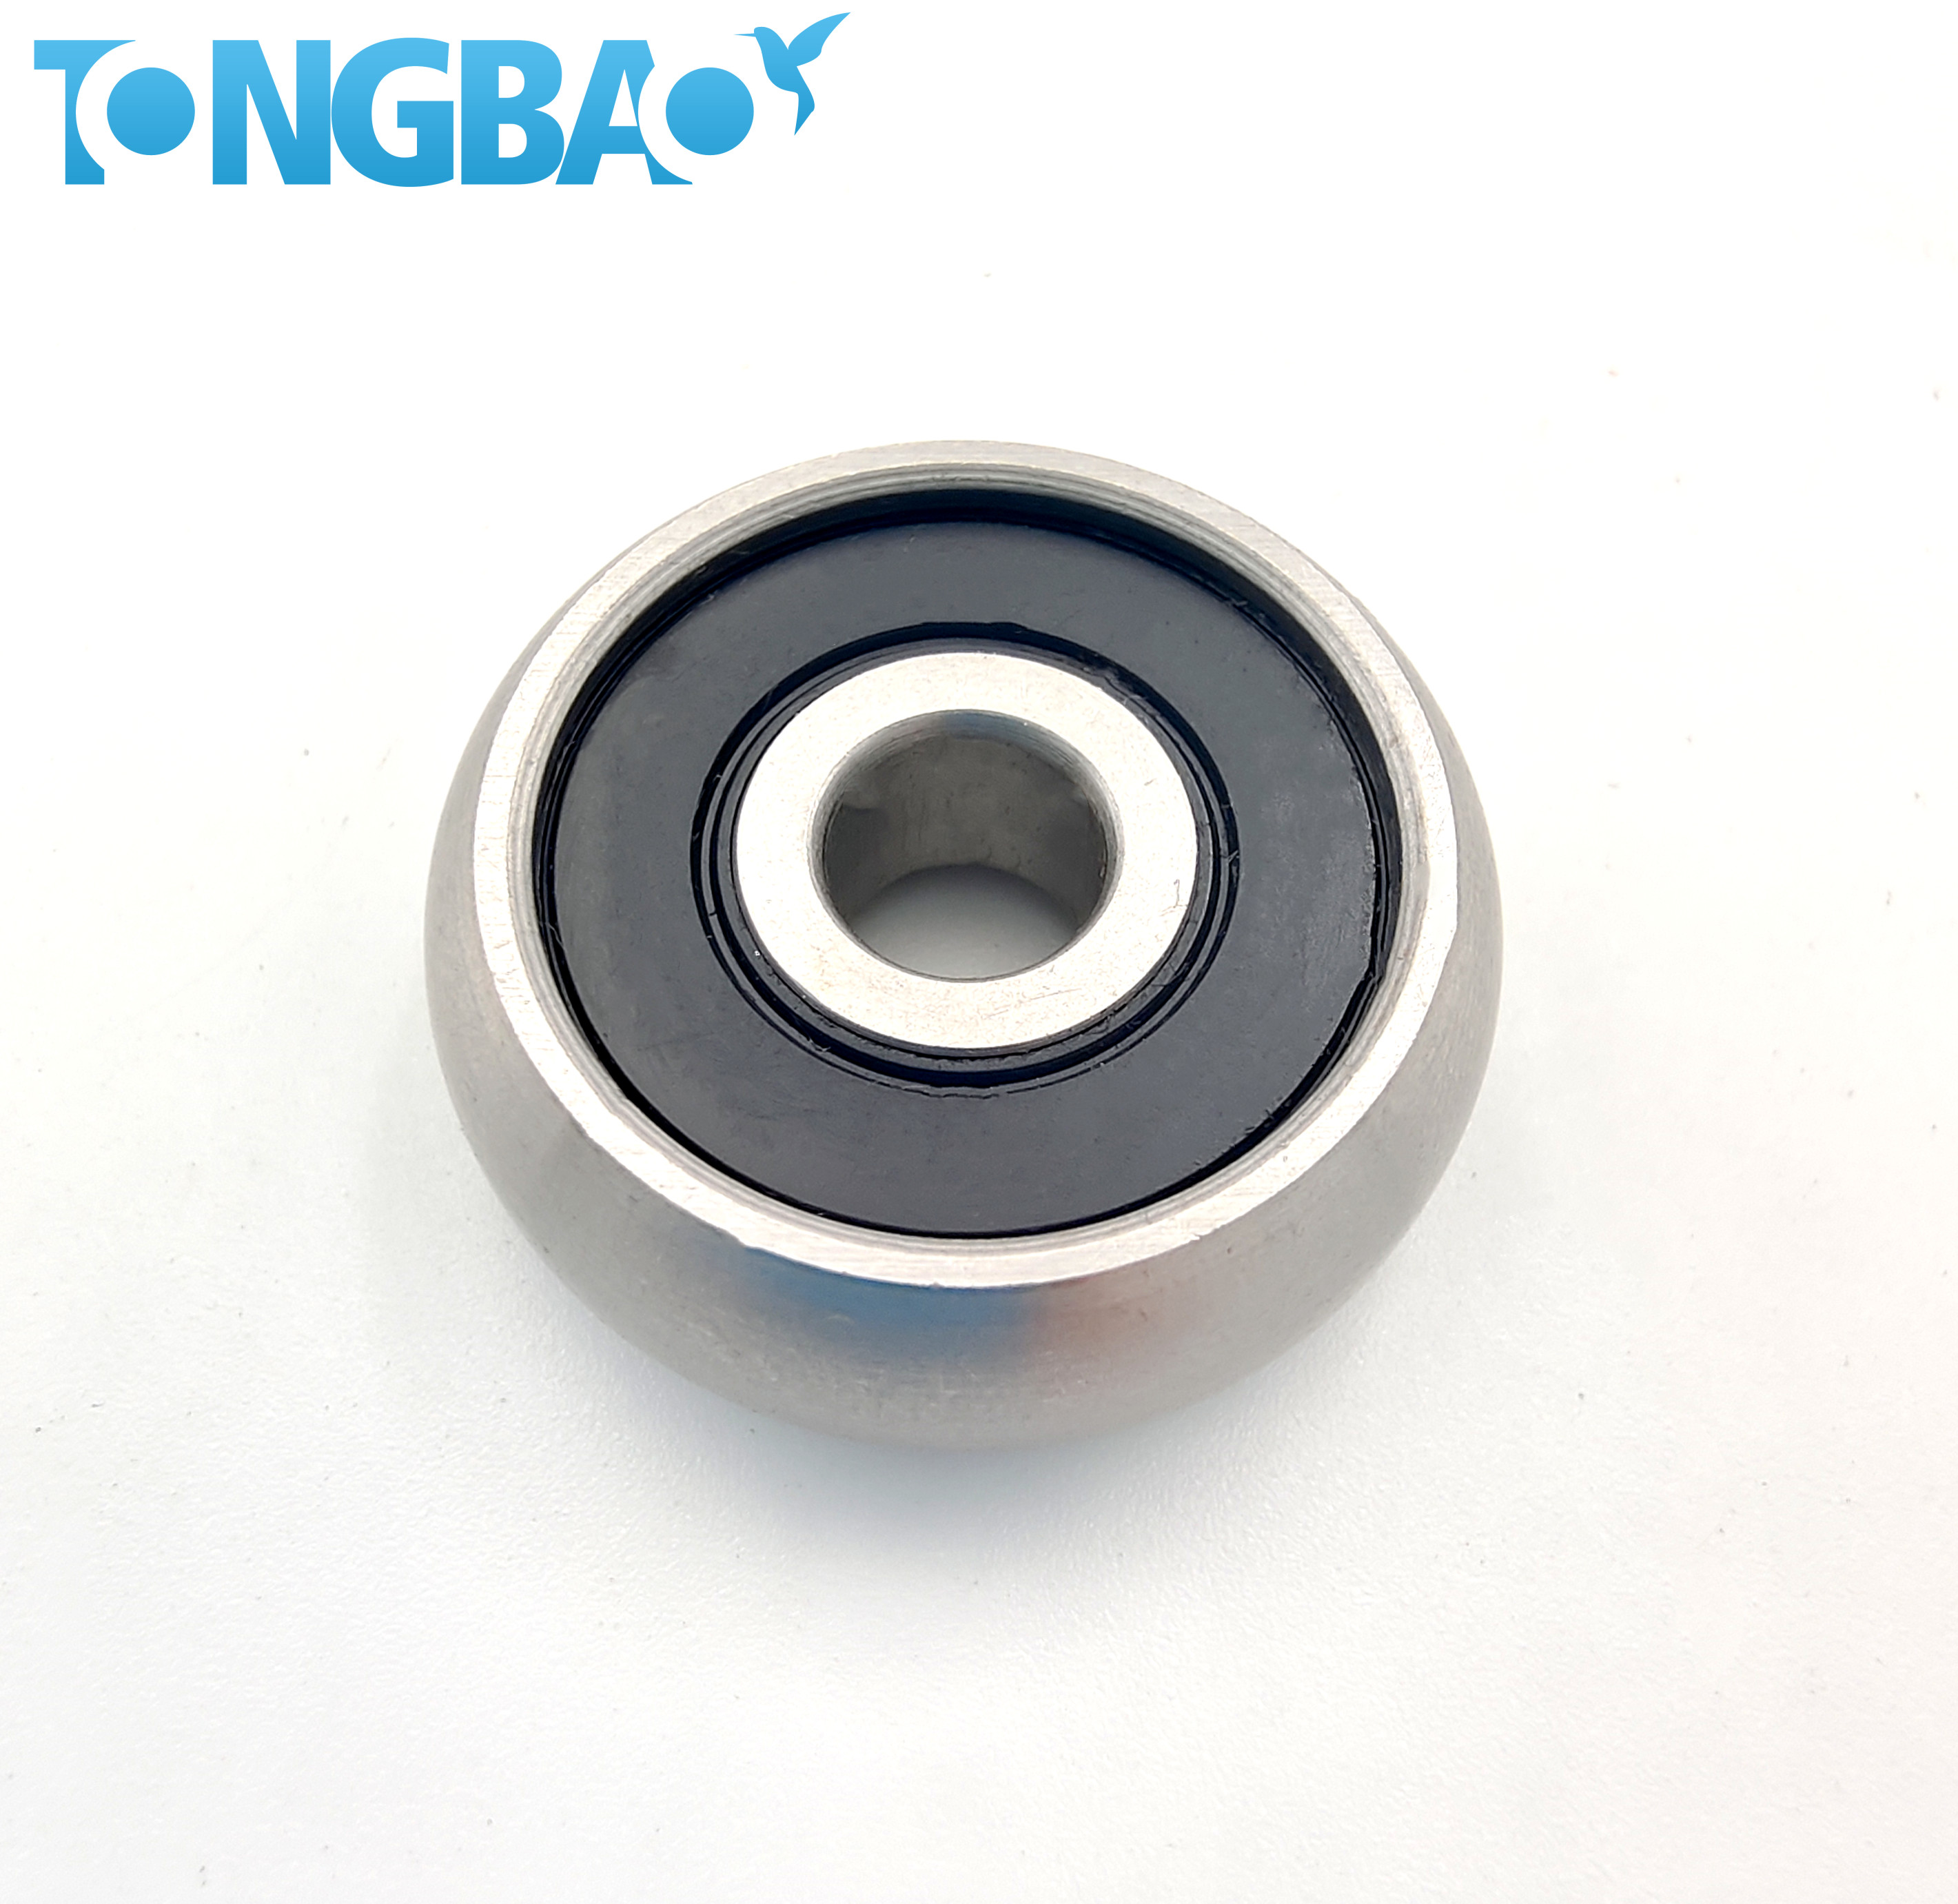 Stainless Steel Insert Bearing for food industry